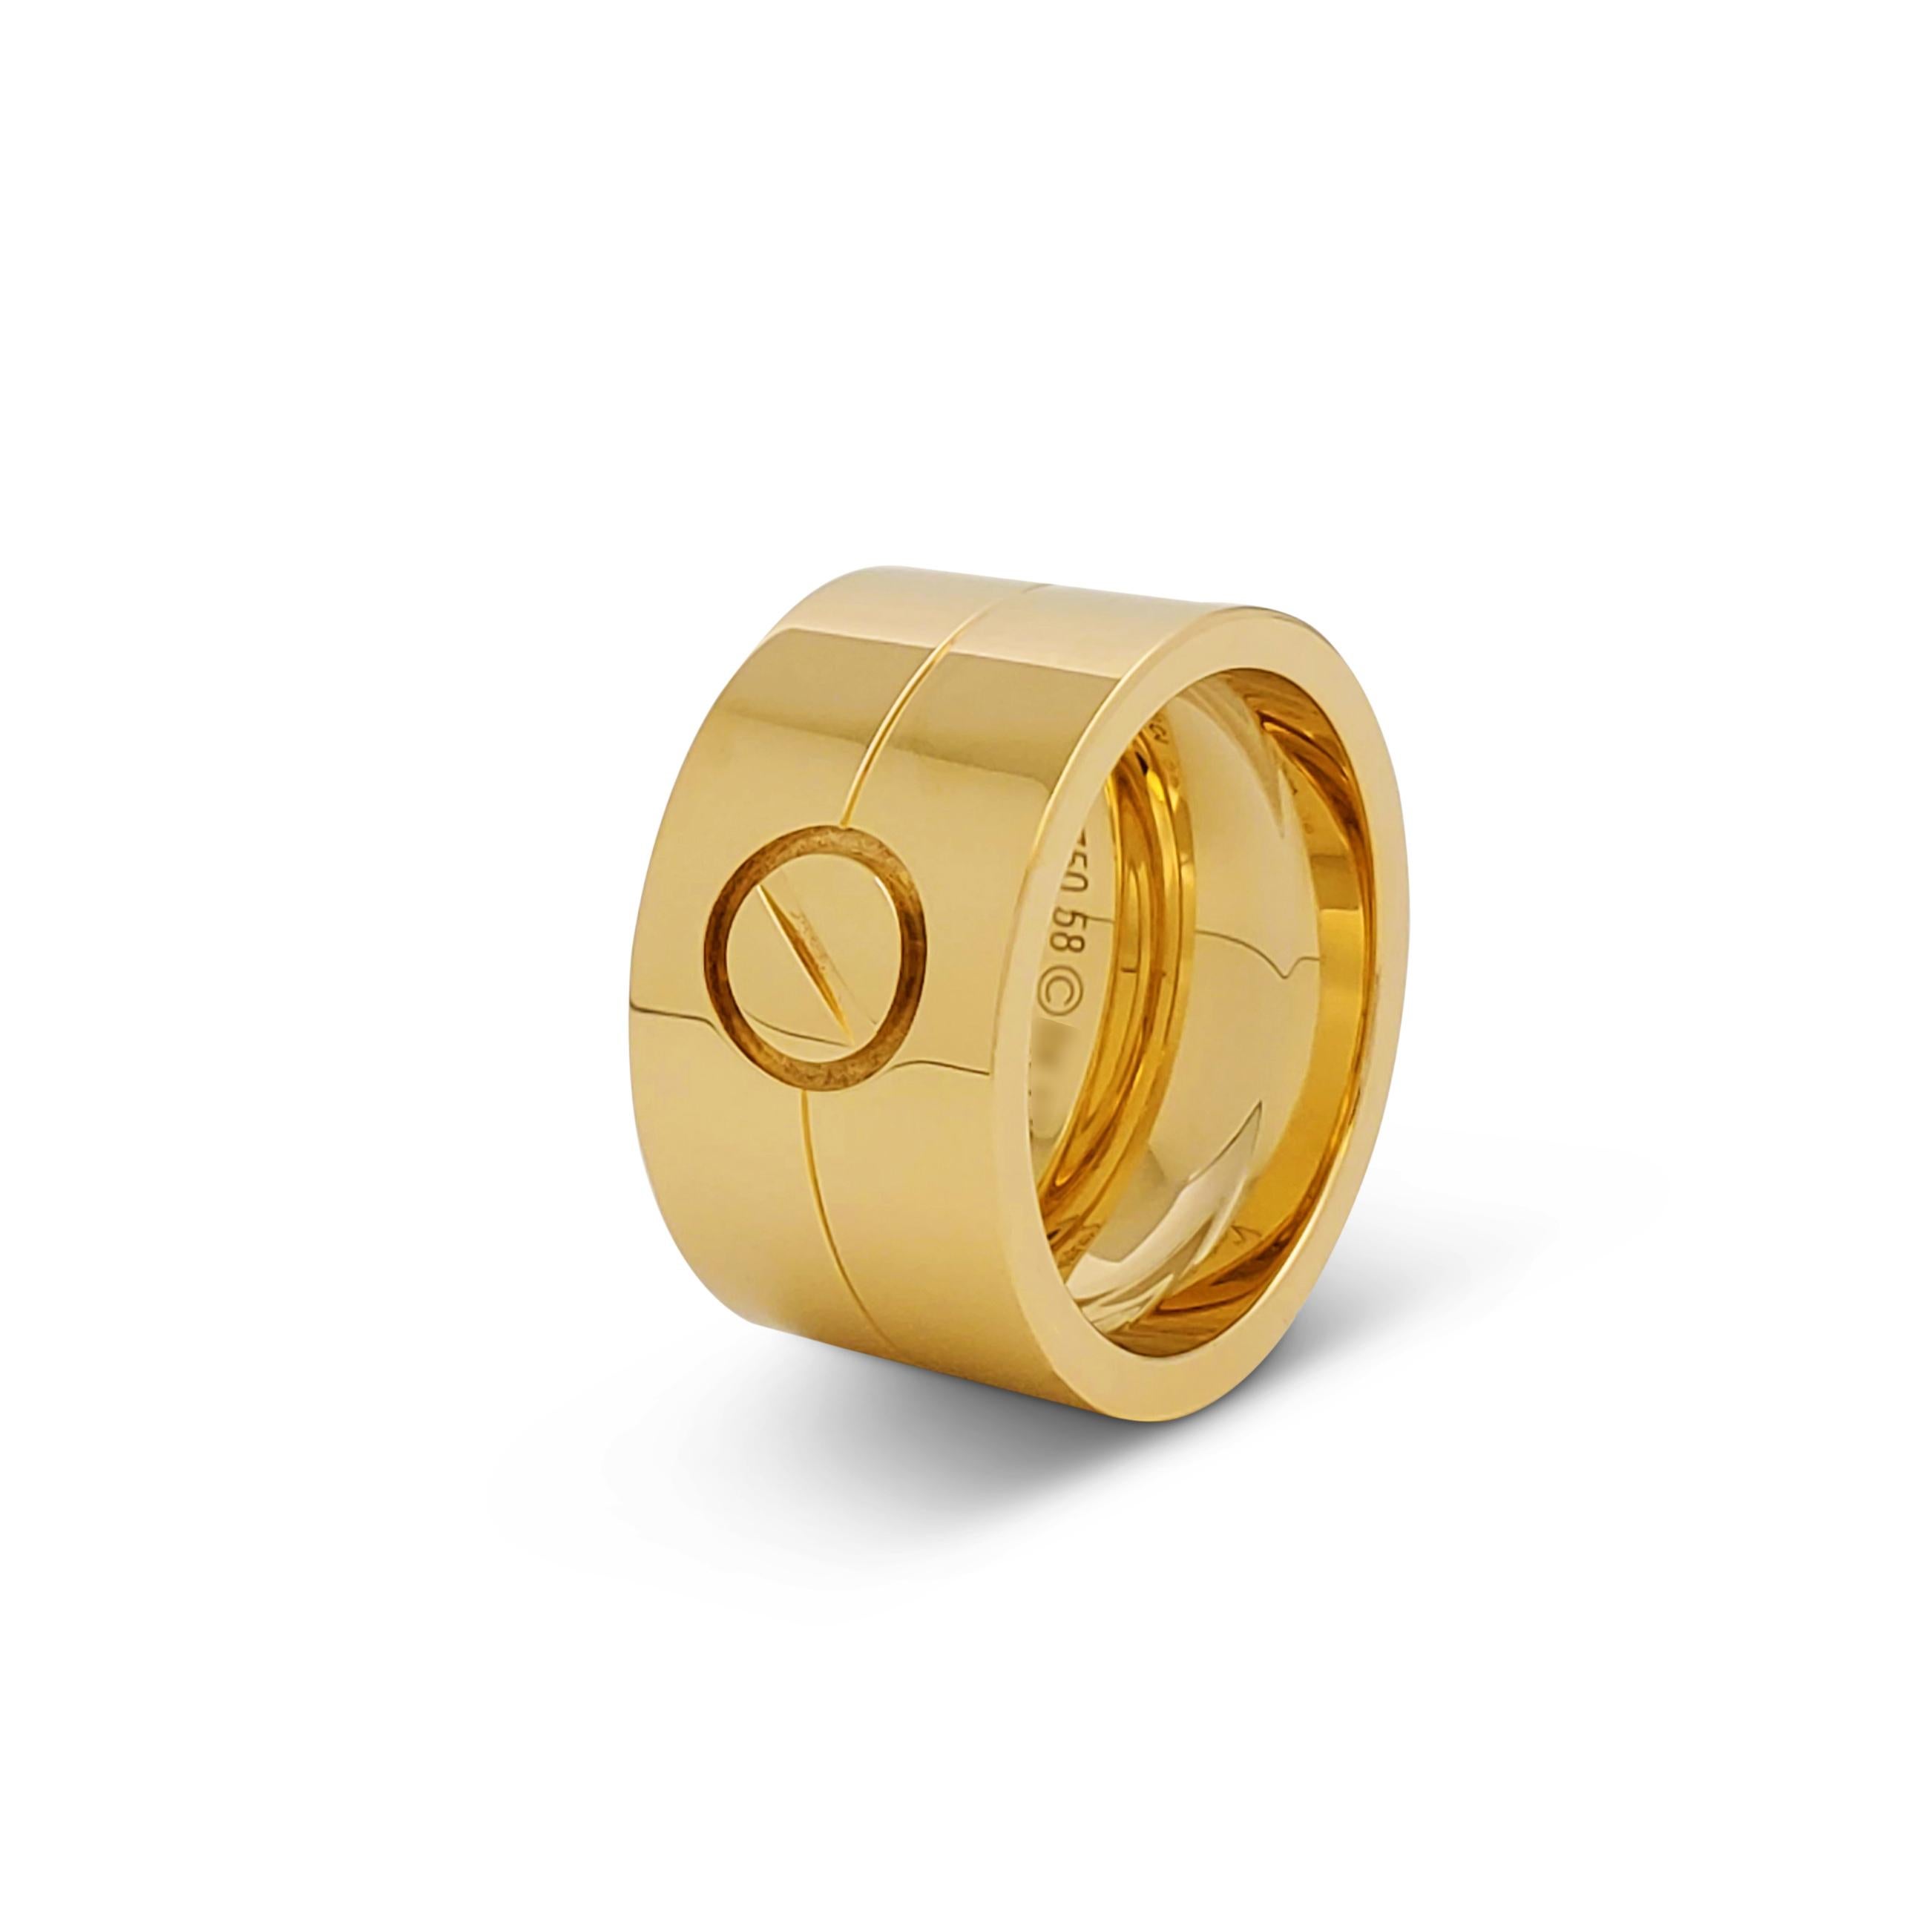 Authentic Cartier Love ring crafted in 18 karat yellow gold and featuring the brand's iconic screwtop design, represented here as a single motif.  Size 58, US 8 1/2.  Signed Cartier 750, 58, with serial number.  Ring is accompanied by Cartier pouch